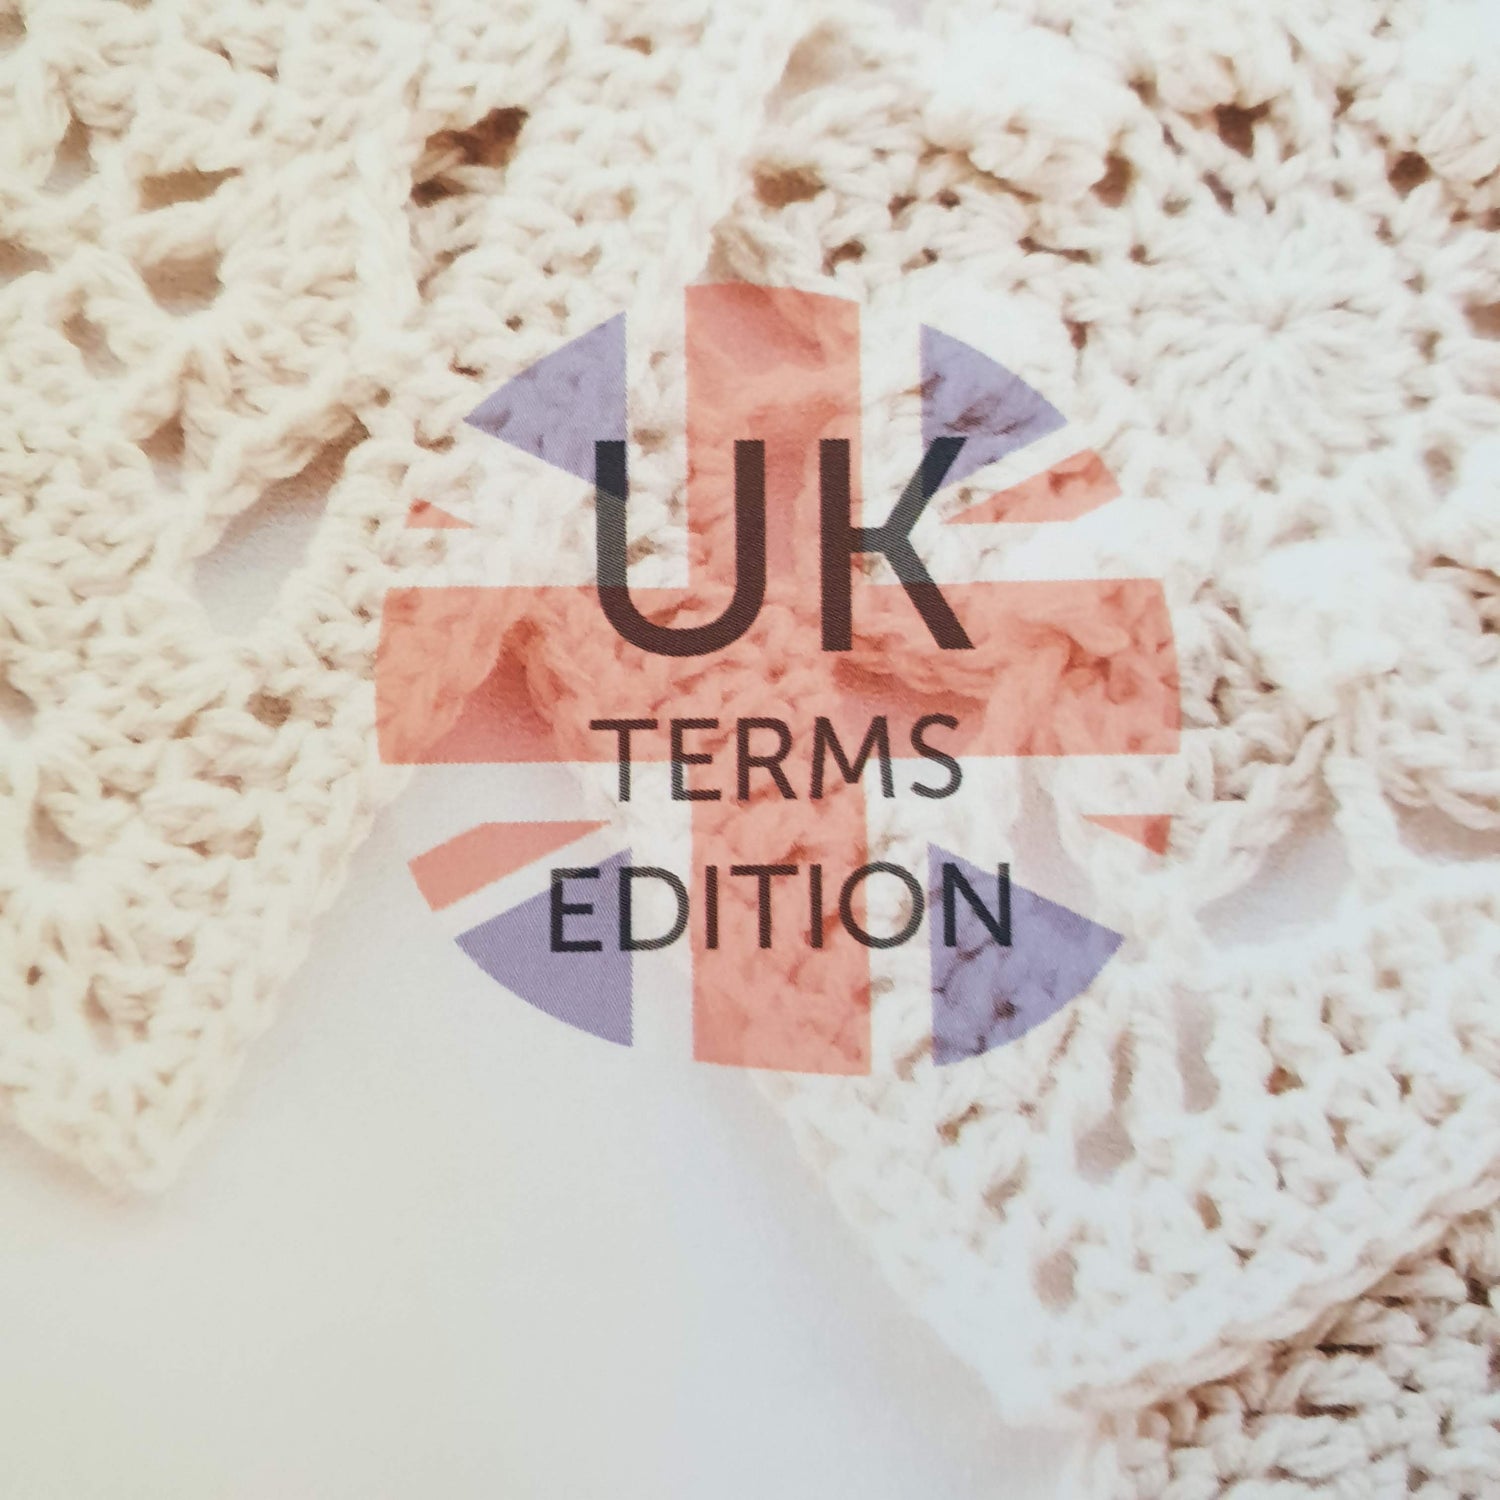 UK Terms Edition graphic from Granny Square Flair by Shelley Husband